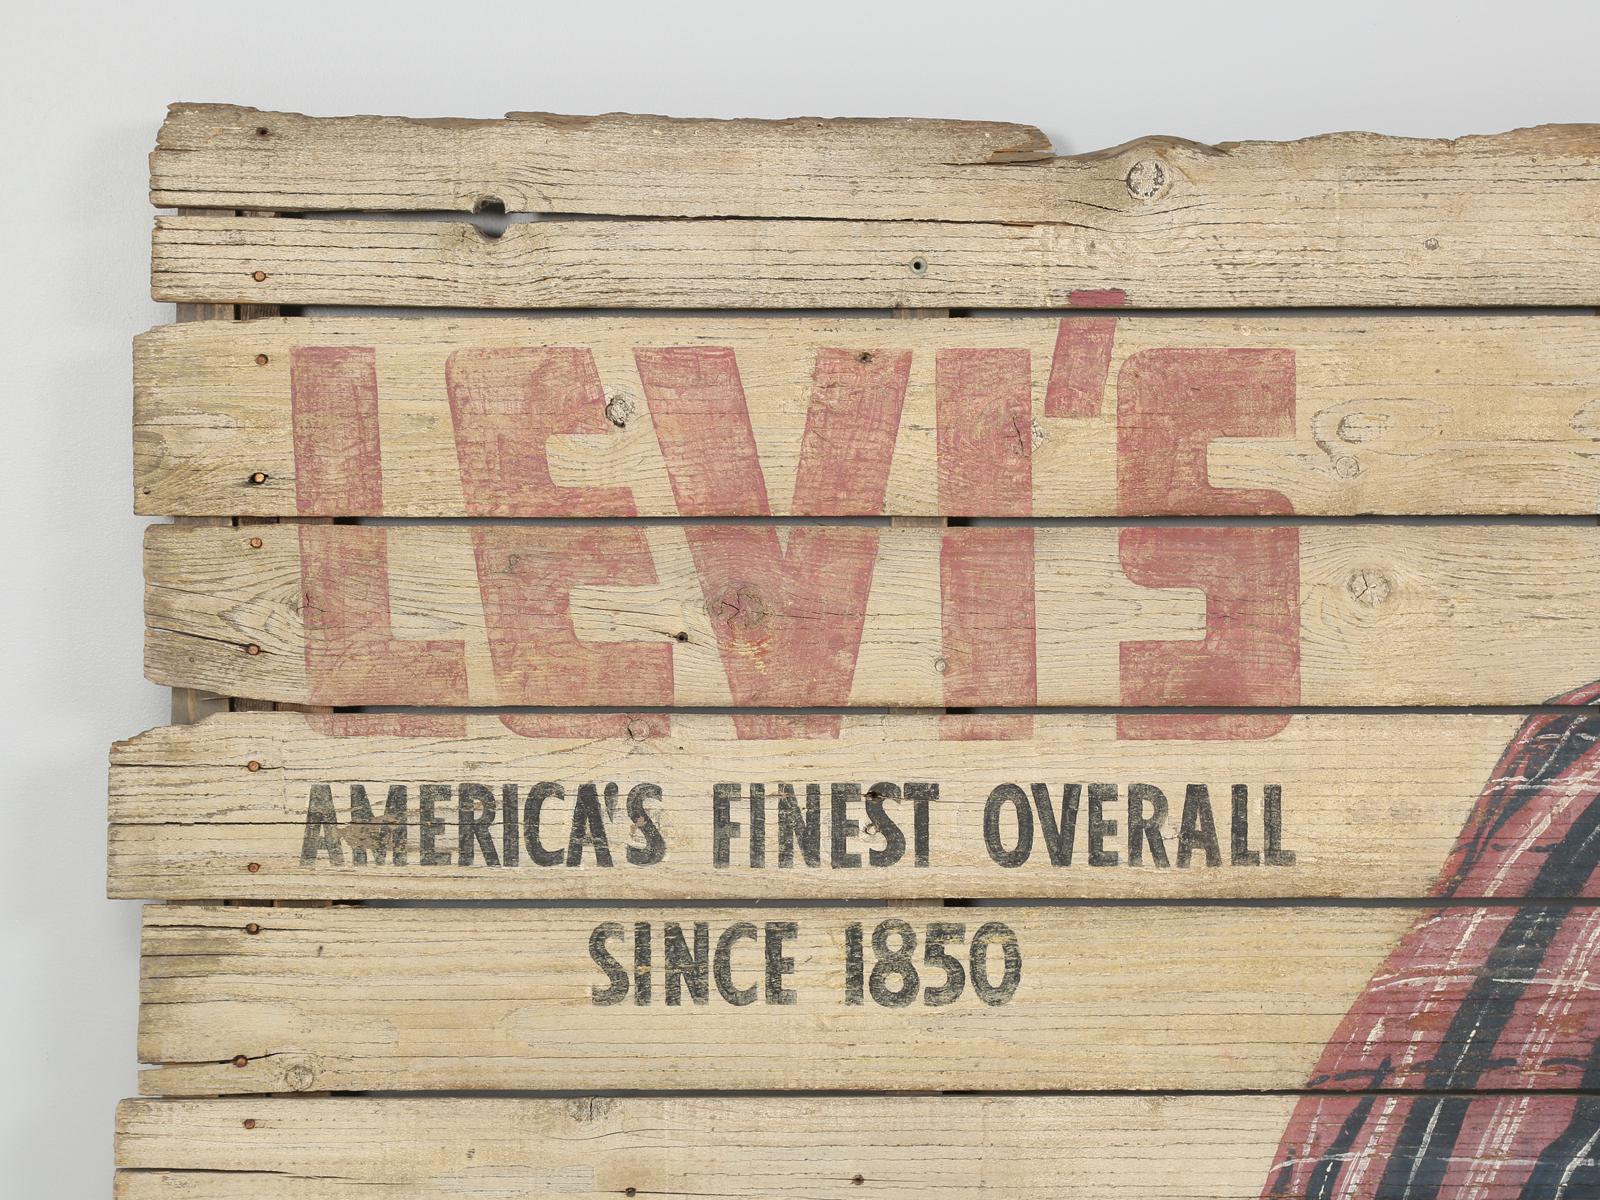 “The West’s most famous brand.” Levi’s America’s finest overall since 1850.

We have been purchasing vintage commercial signs for over 30 years, and we have never discovered one of such grand proportions with such incredible subject matter. What is